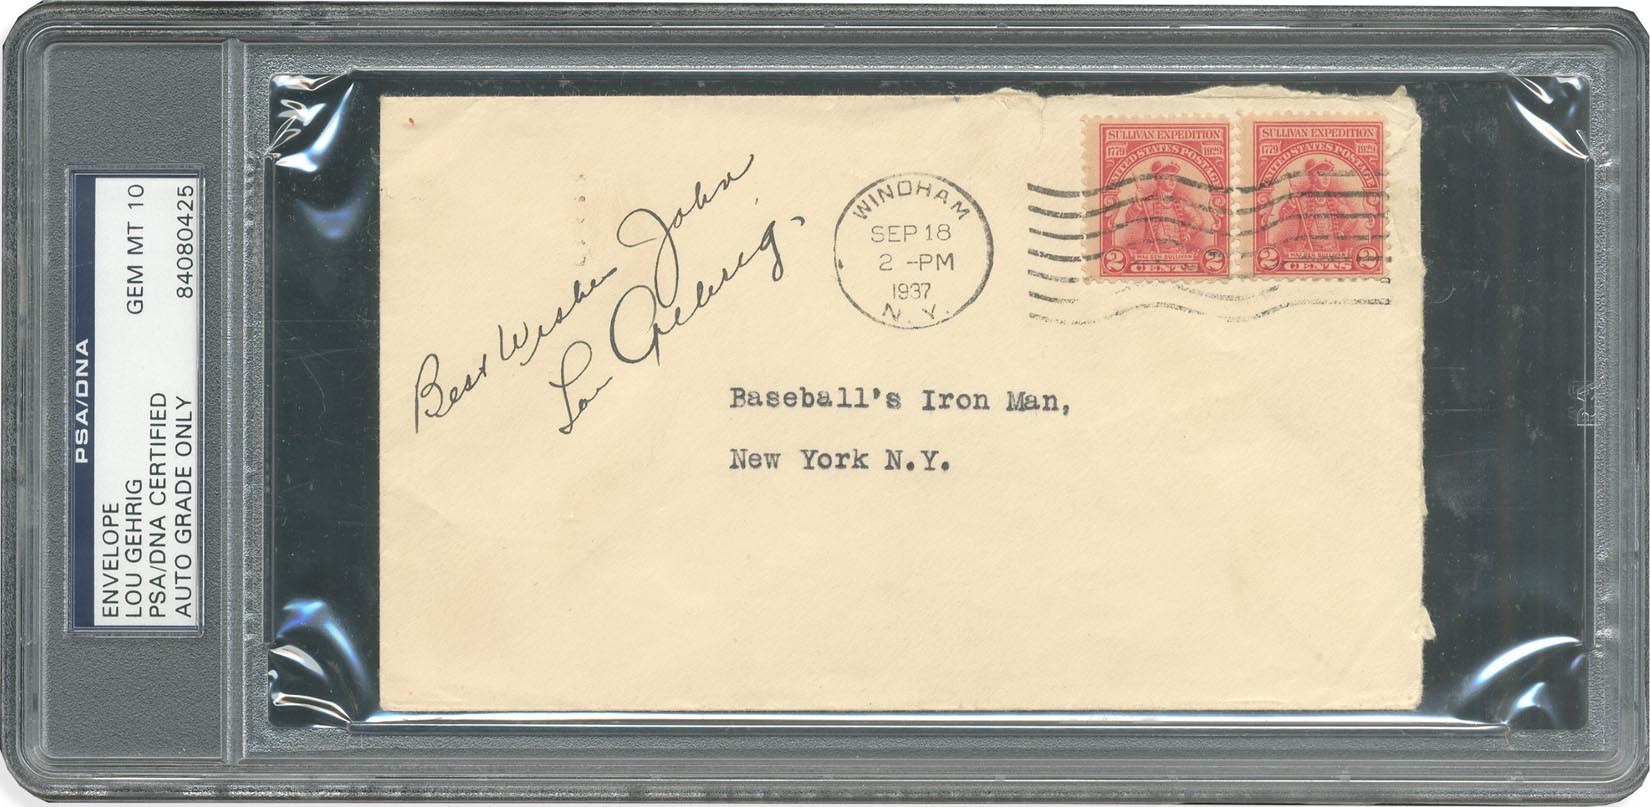 - 1937 Lou Gehrig Envelope Addressed Merely to "Baseball's Iron Man" That Got There! (PSA/DNA 10)